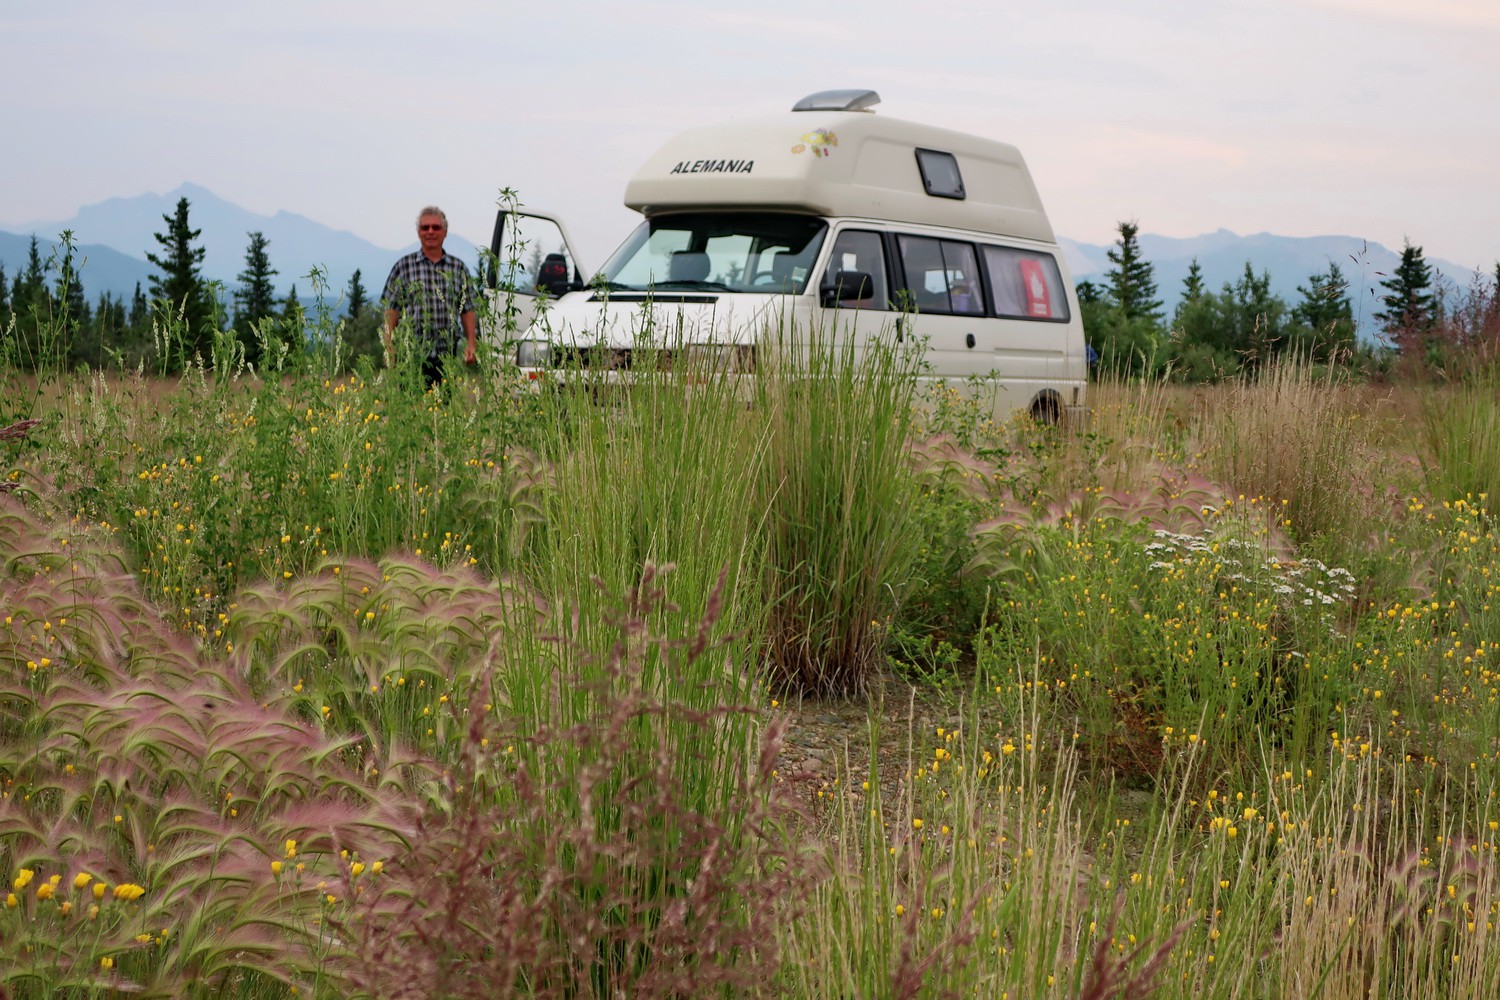 Campsite on the way to Denali National Park